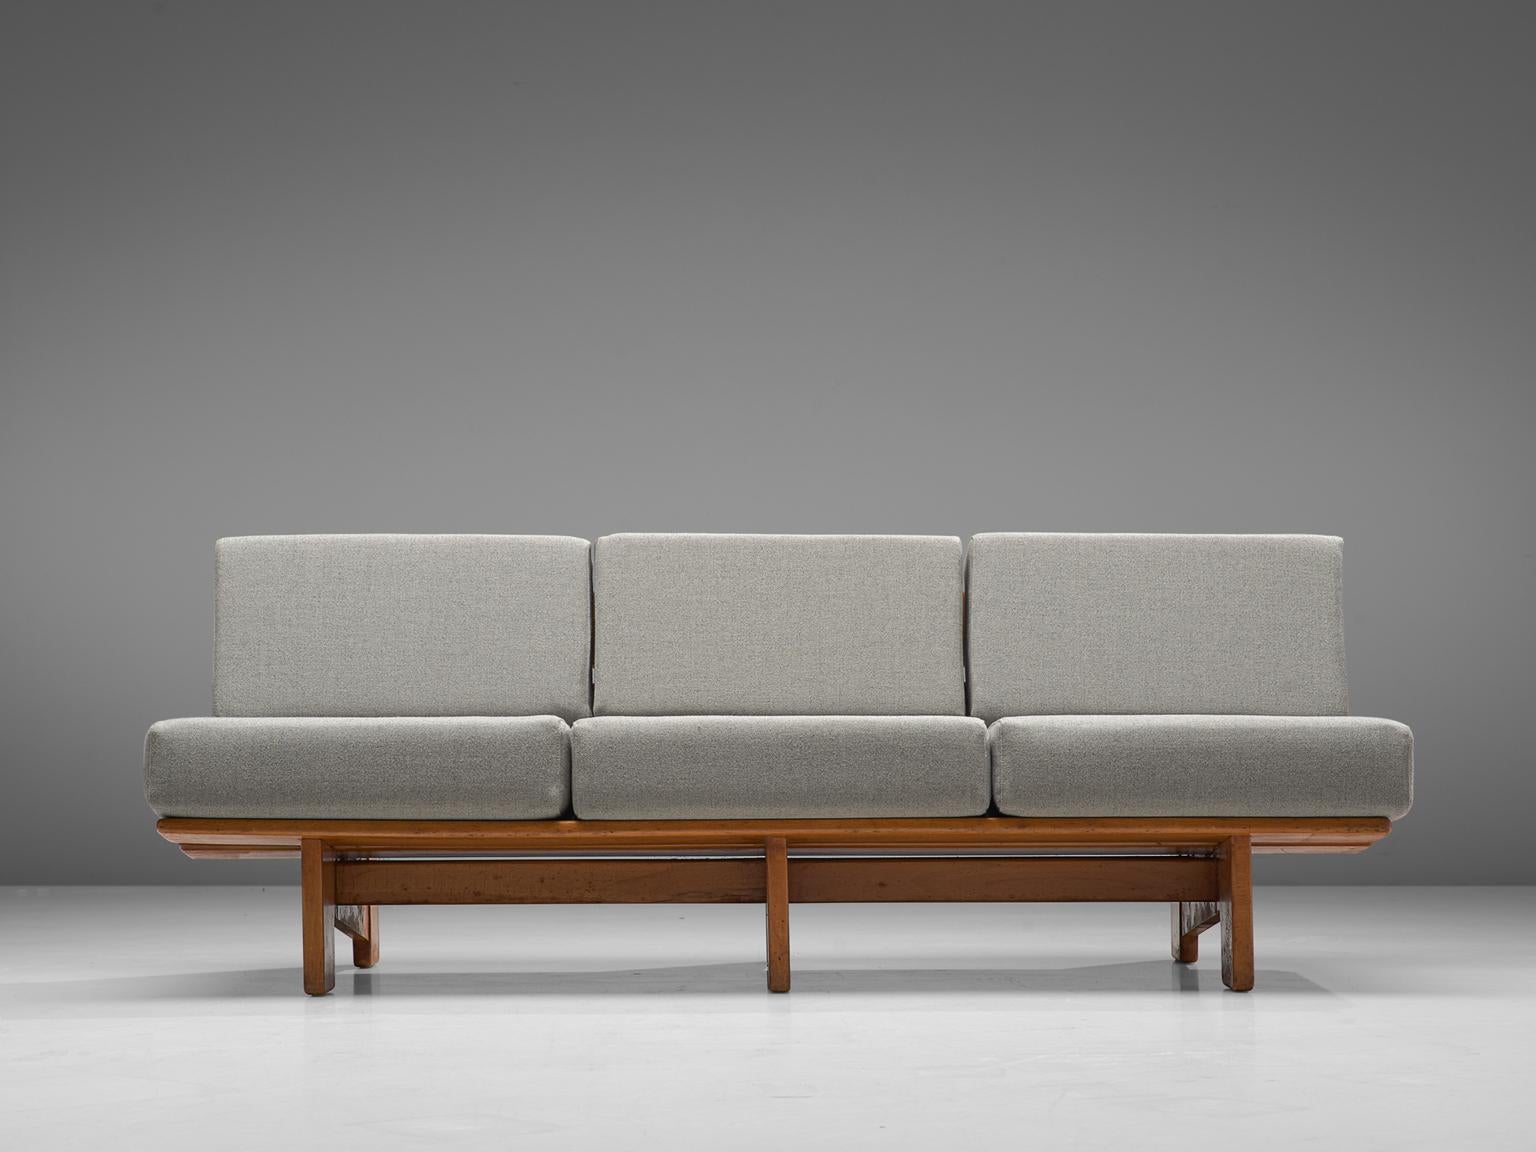 Fabric European Lounge Set in Oak with Grey Upholstery, 1950s